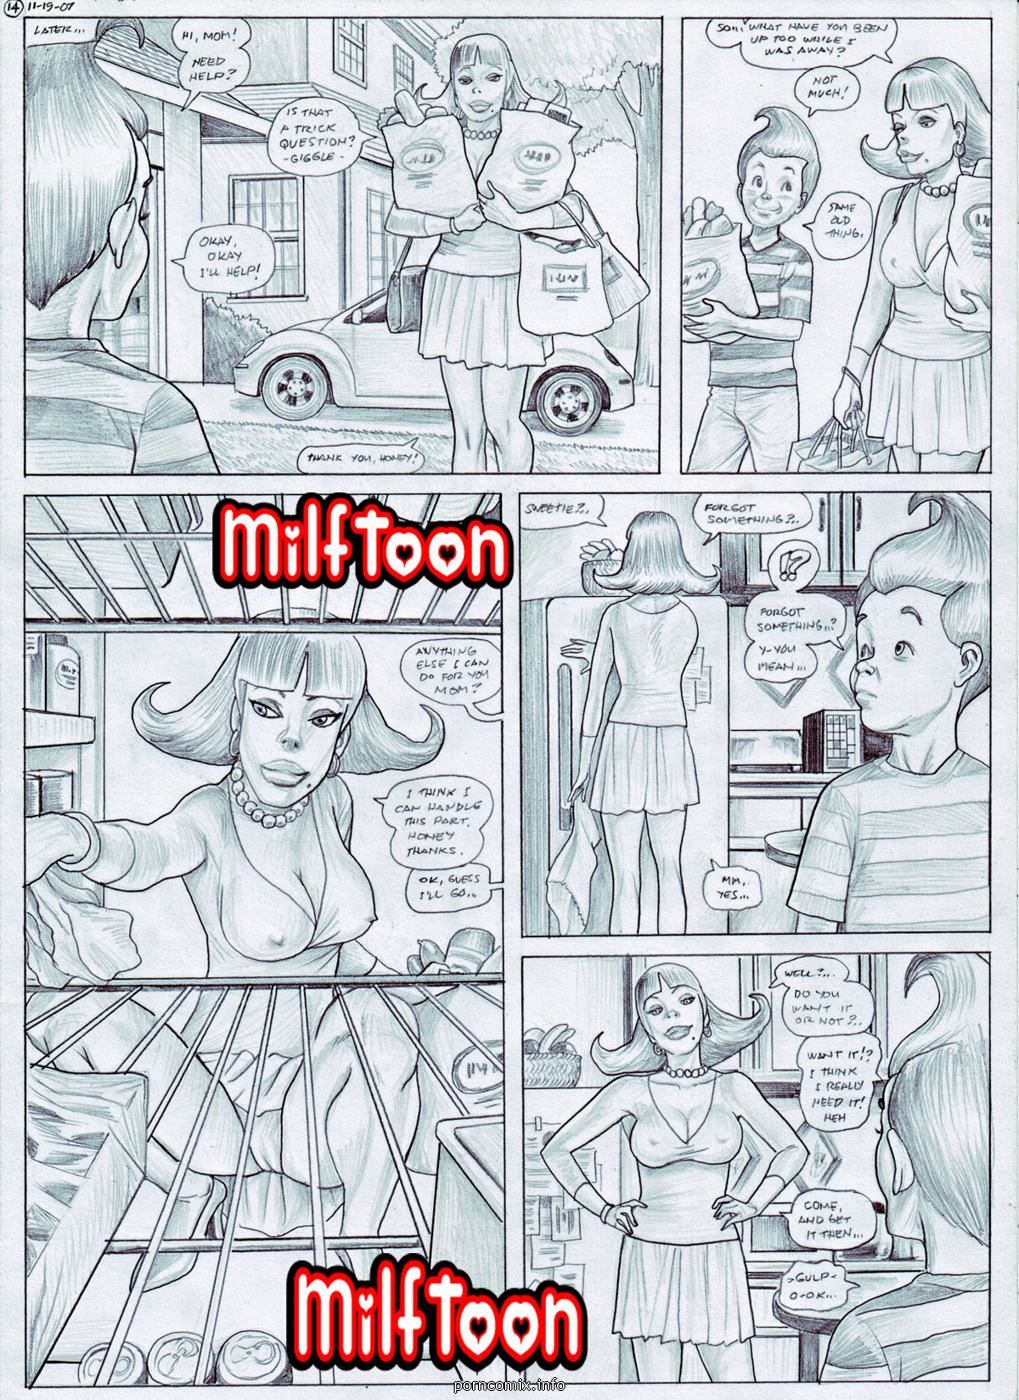 Milftoon - Jimmy Naitron page 15